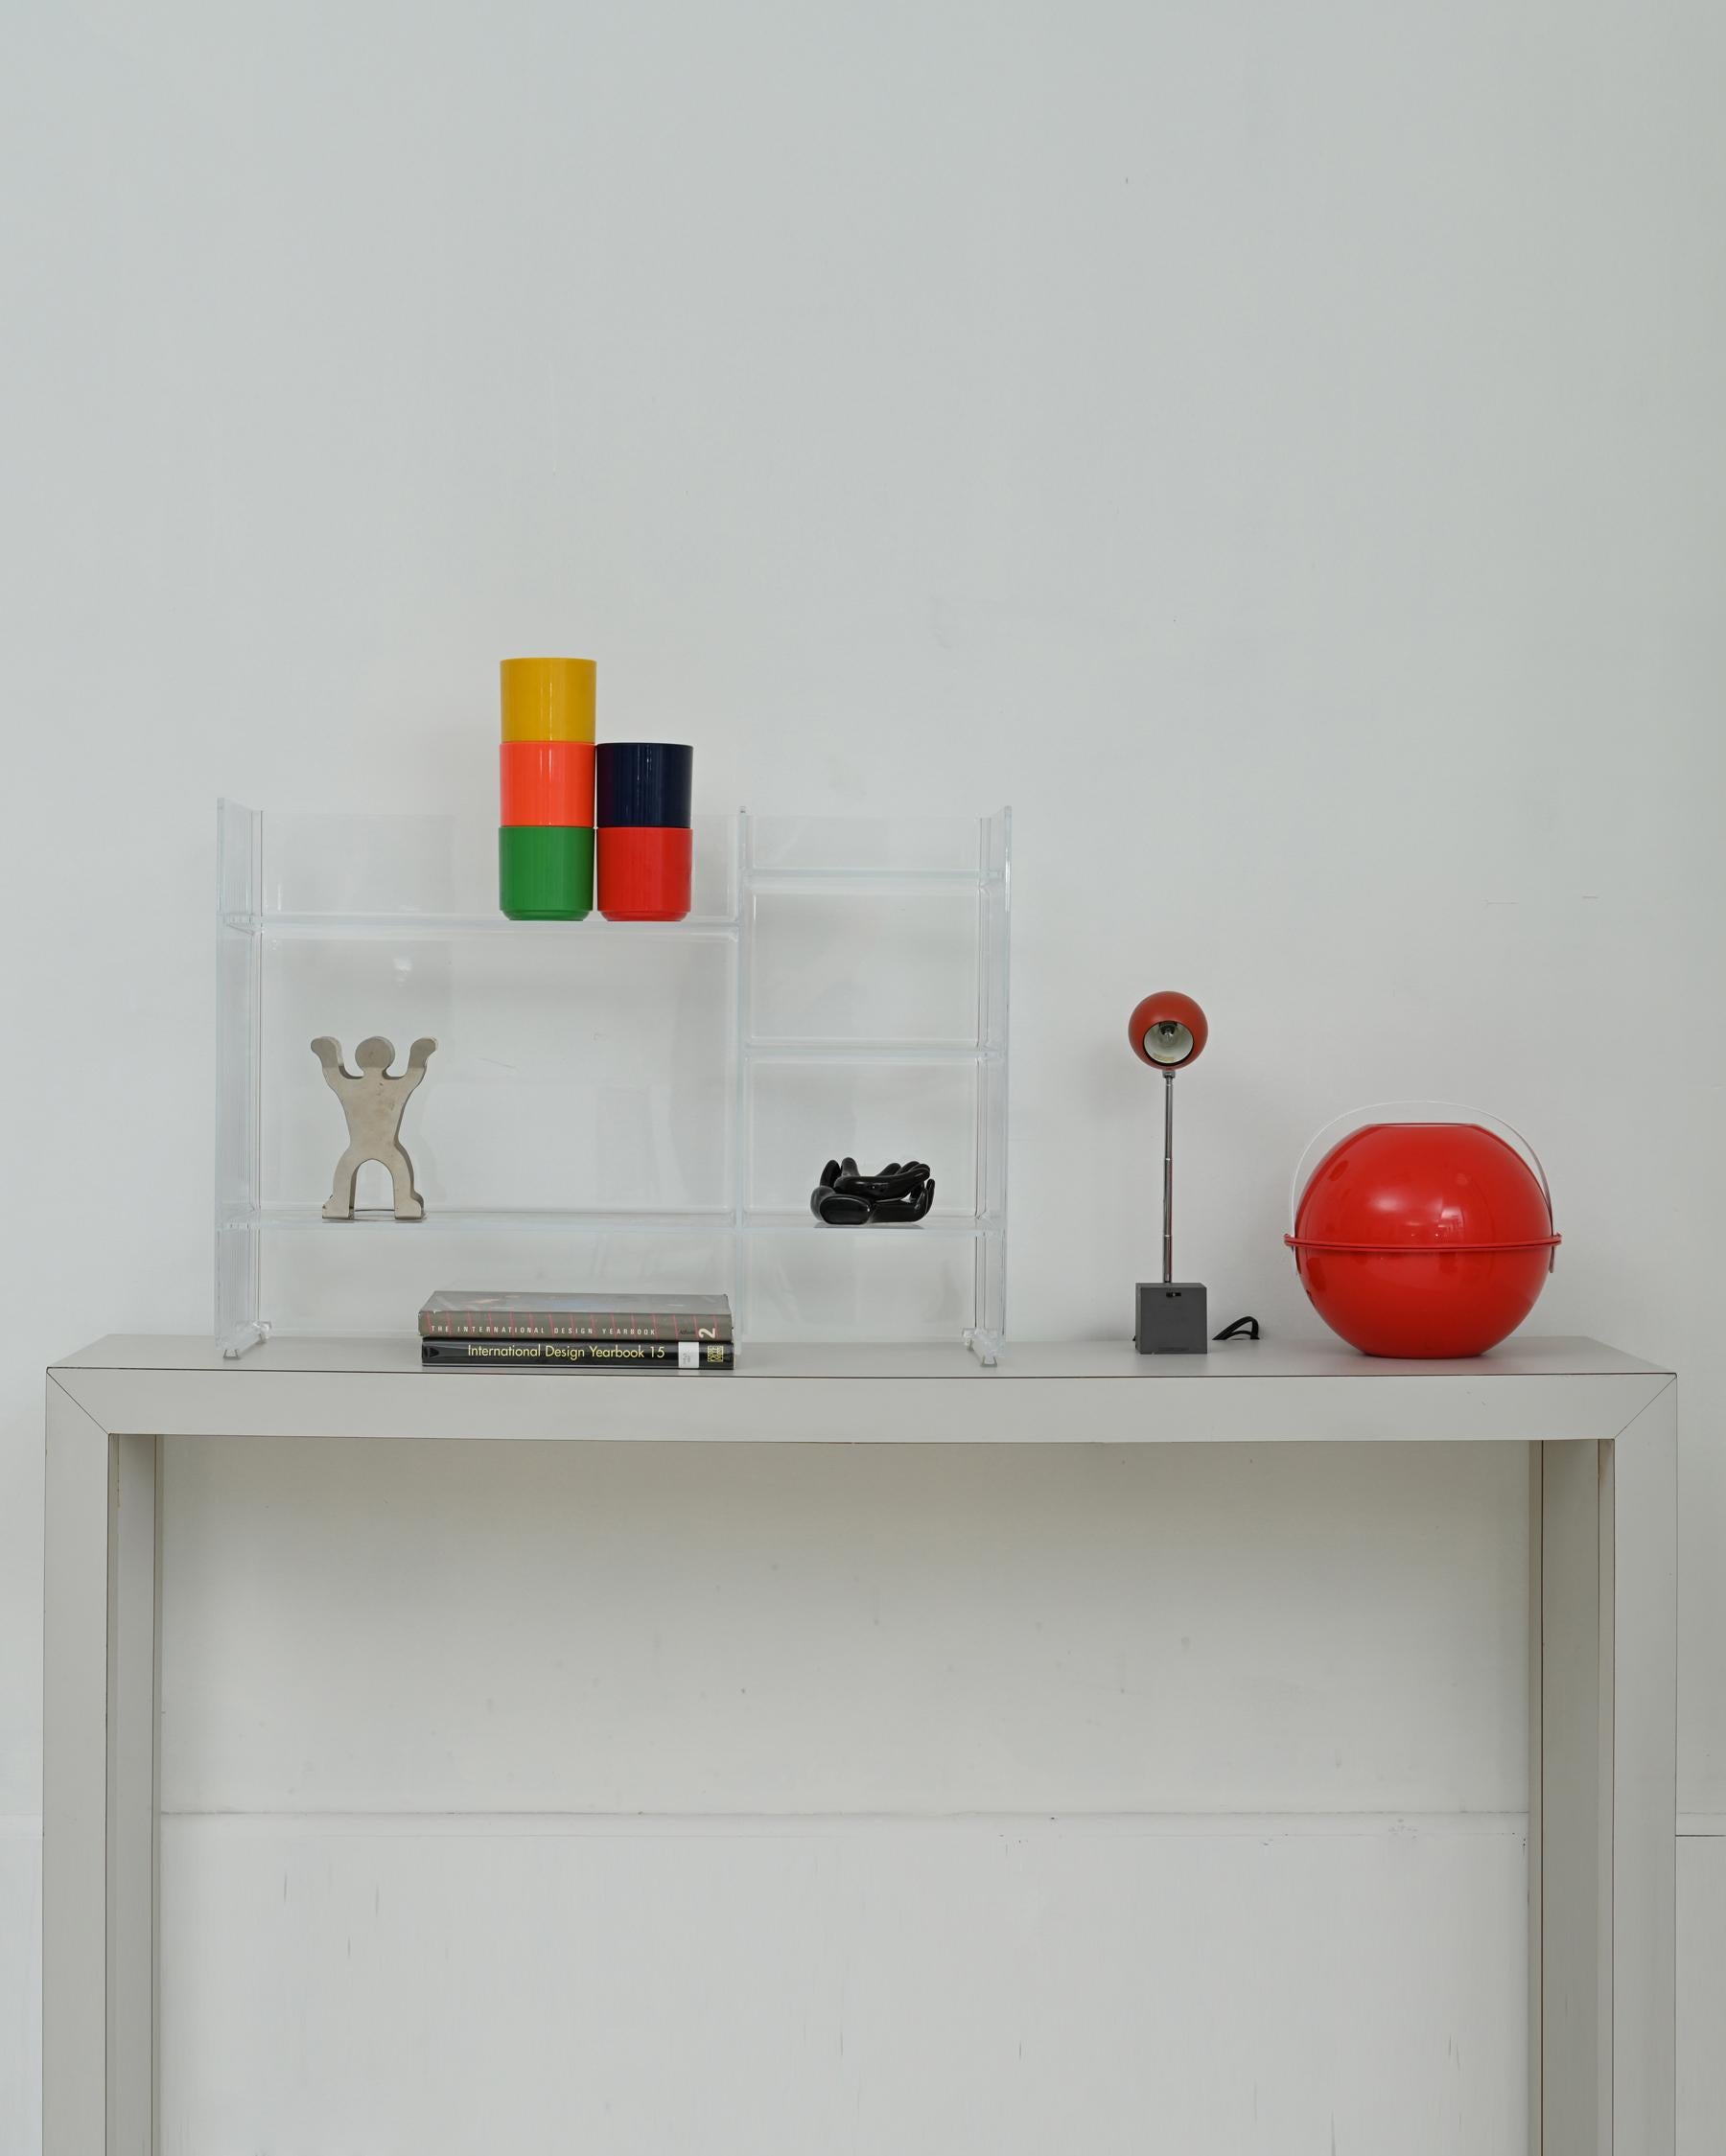 Another modular piece from Kartell designers, the “Sound Rack” by Ludovica and Roberto Palomba is a small cabinet that can take on many forms. It can be stacked and positioned in many ways, lending itself to the creation of various geometric and